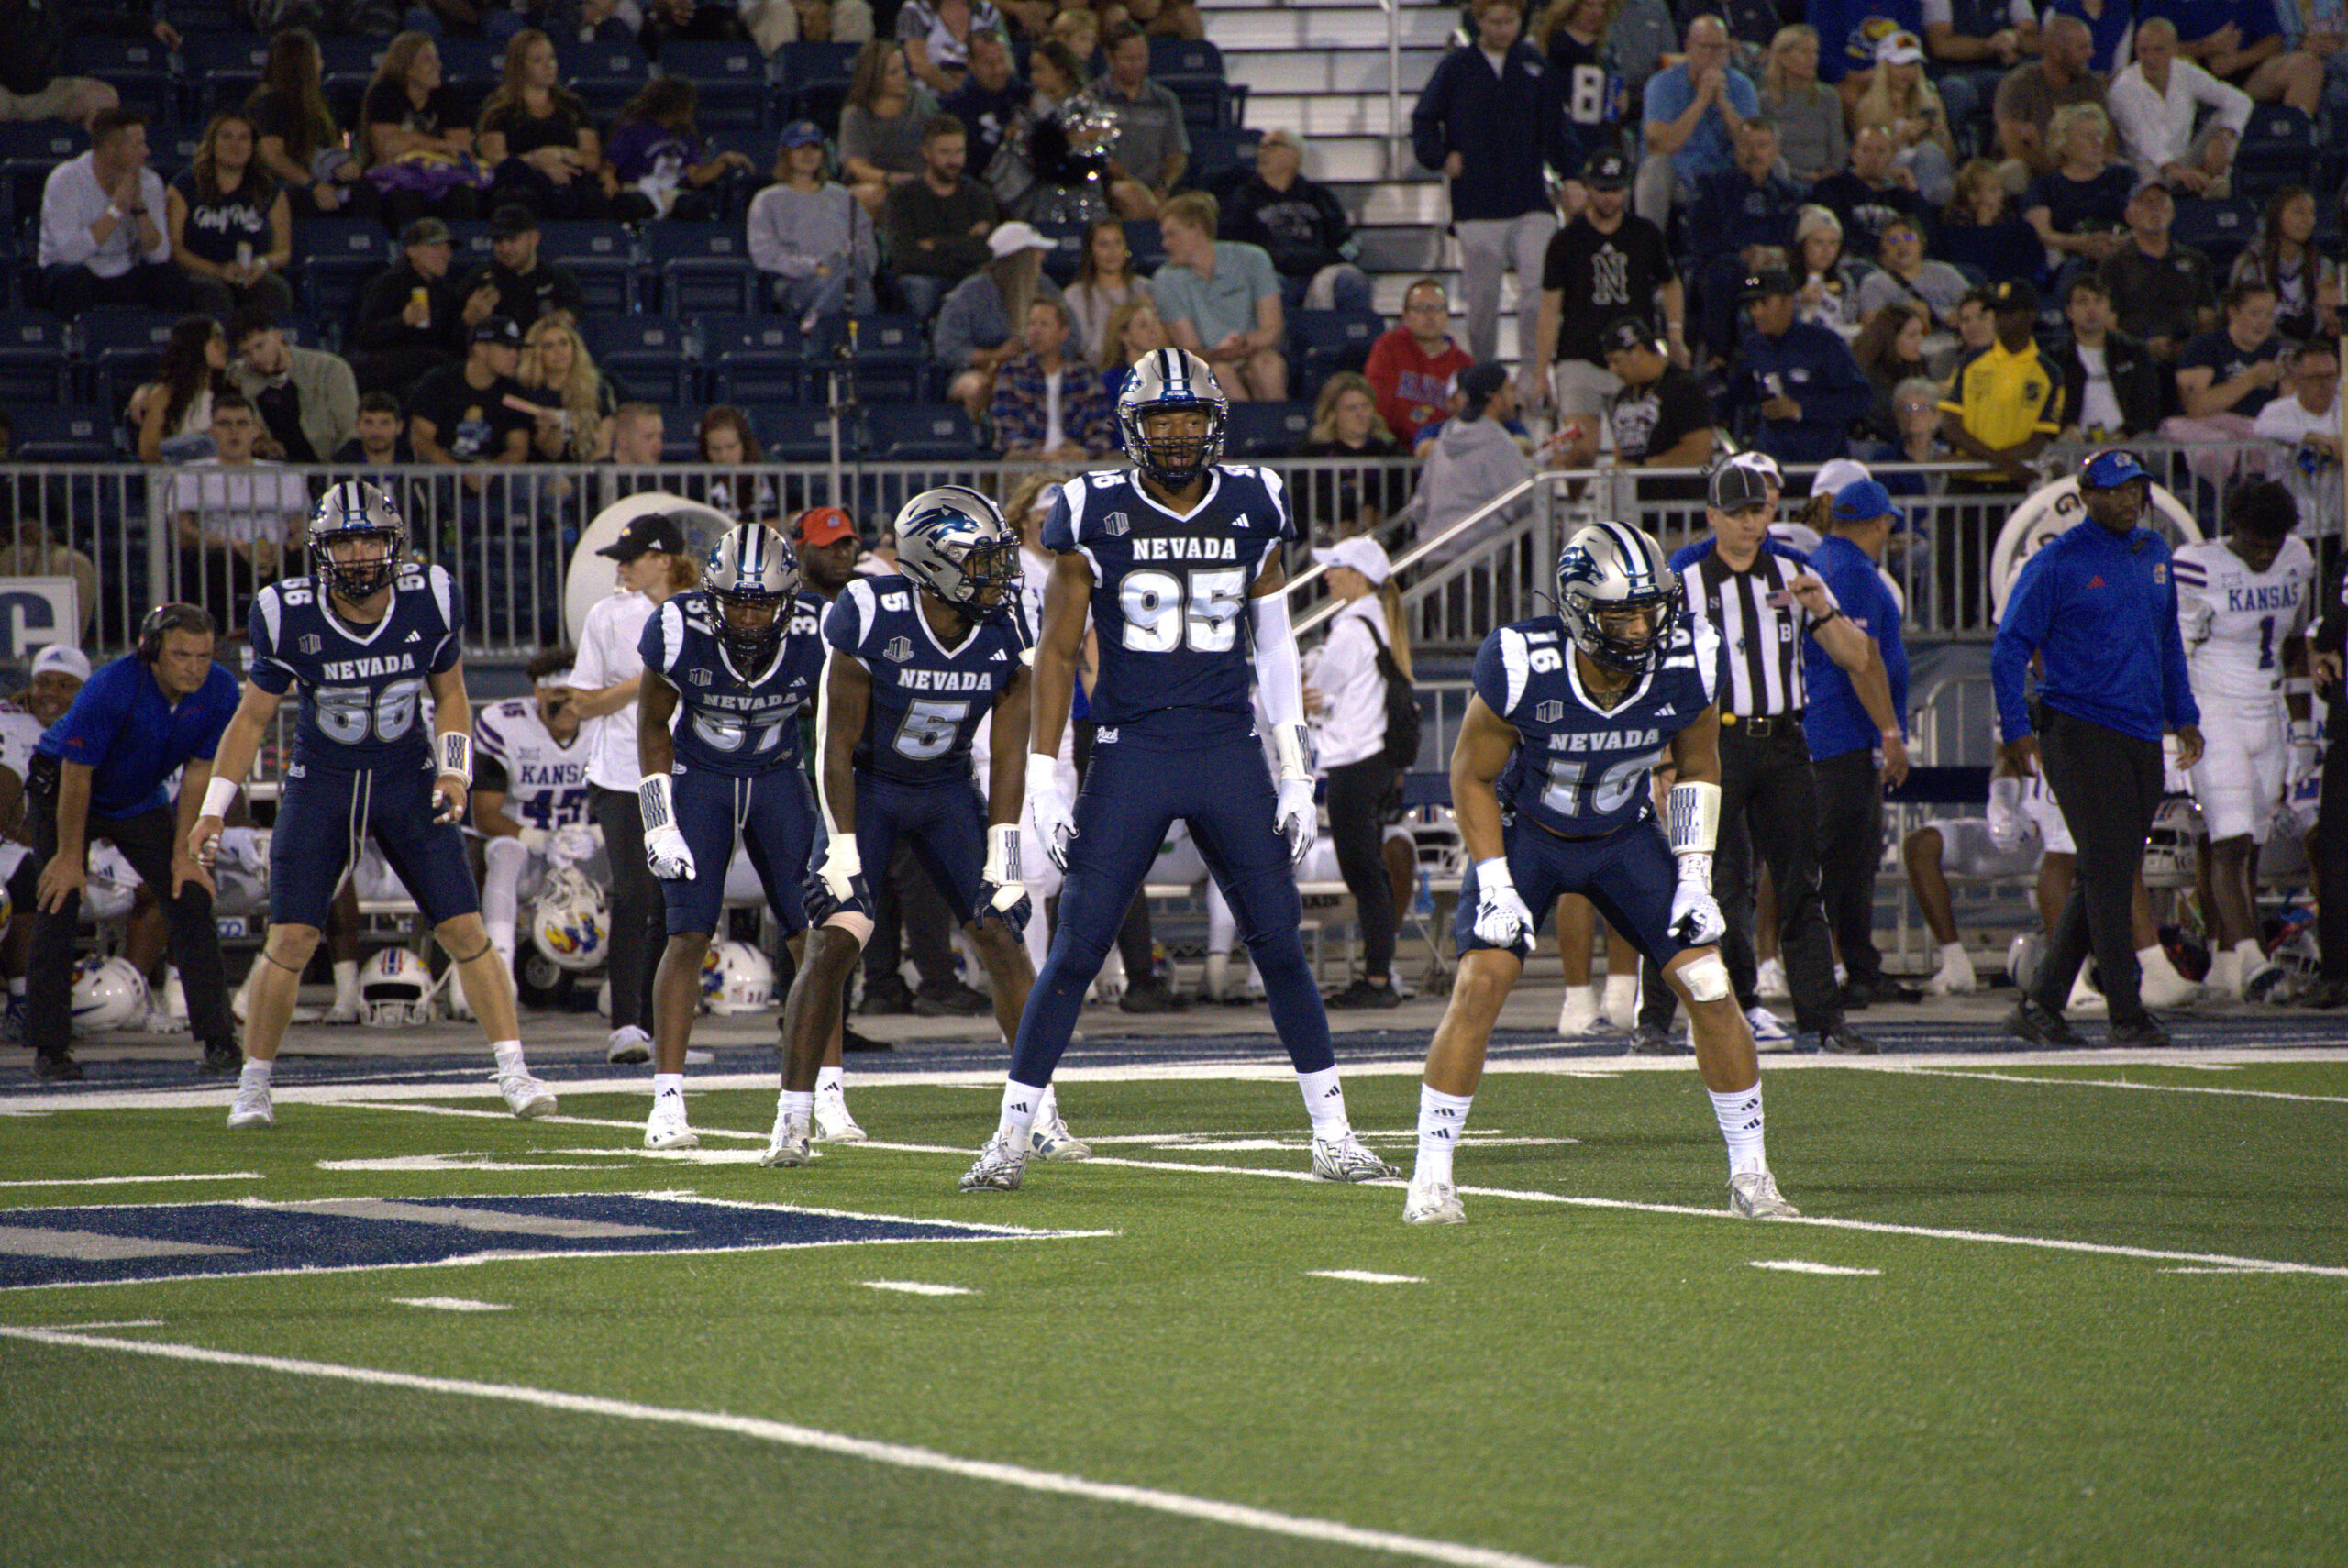 Wolf Pack falls to Texas State 35-24, allows 35 unanswered points